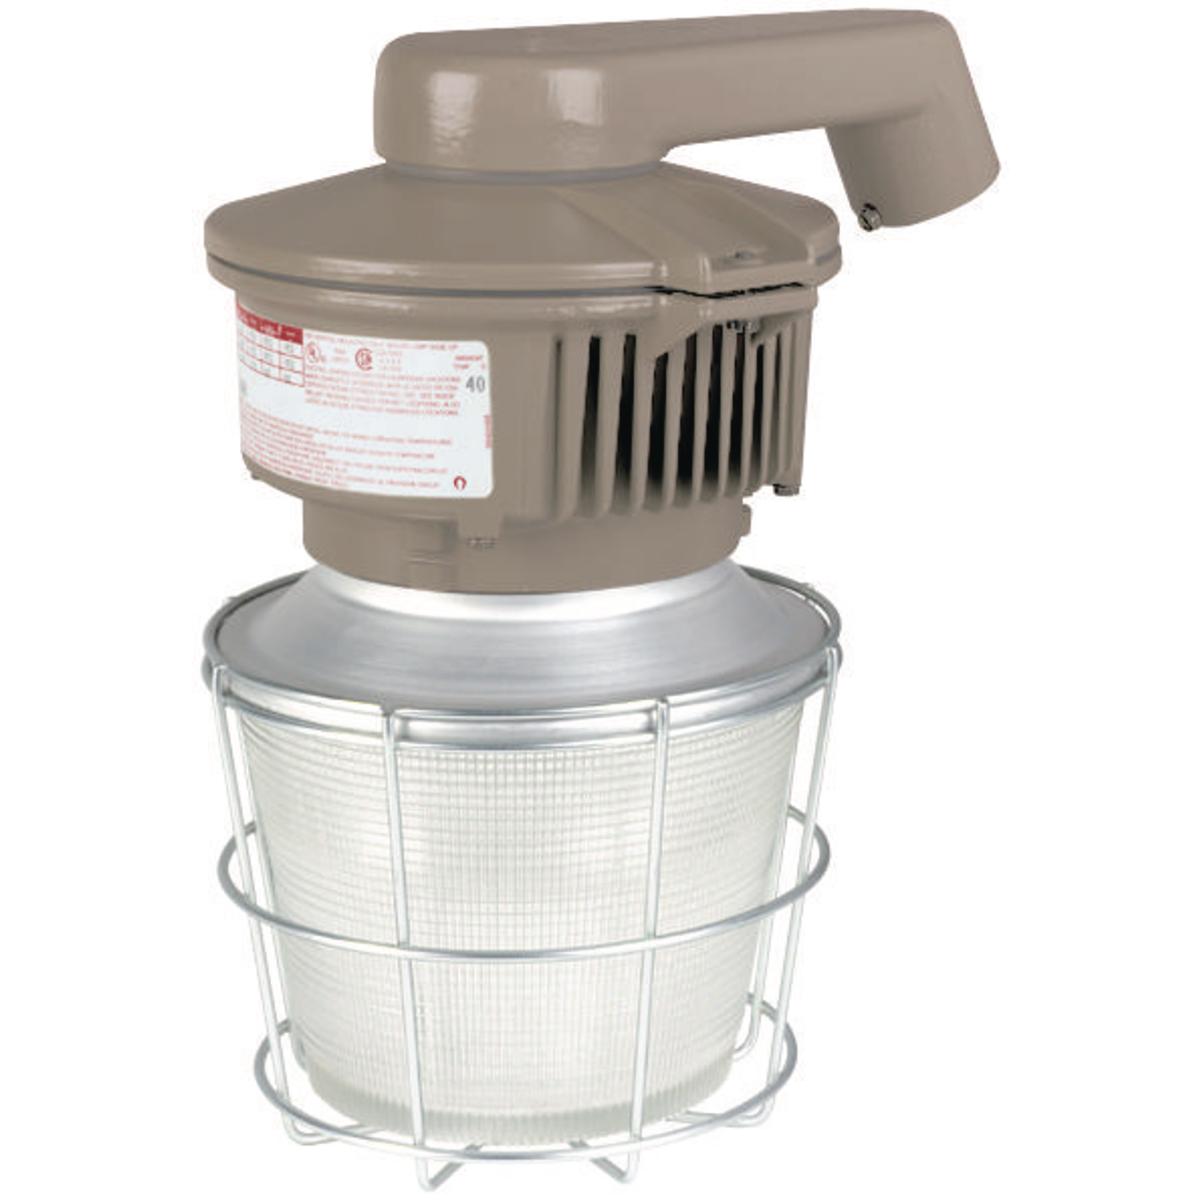 Hubbell MBL2230D4S8G The MBL Series is a compact low bay energy efficient LED. The design of the MBL makes it suitable for harsh and hazardous environments using a cast copper-free aluminum. Its low profile and compact design allow the MBL to fit in areas where larger fixture